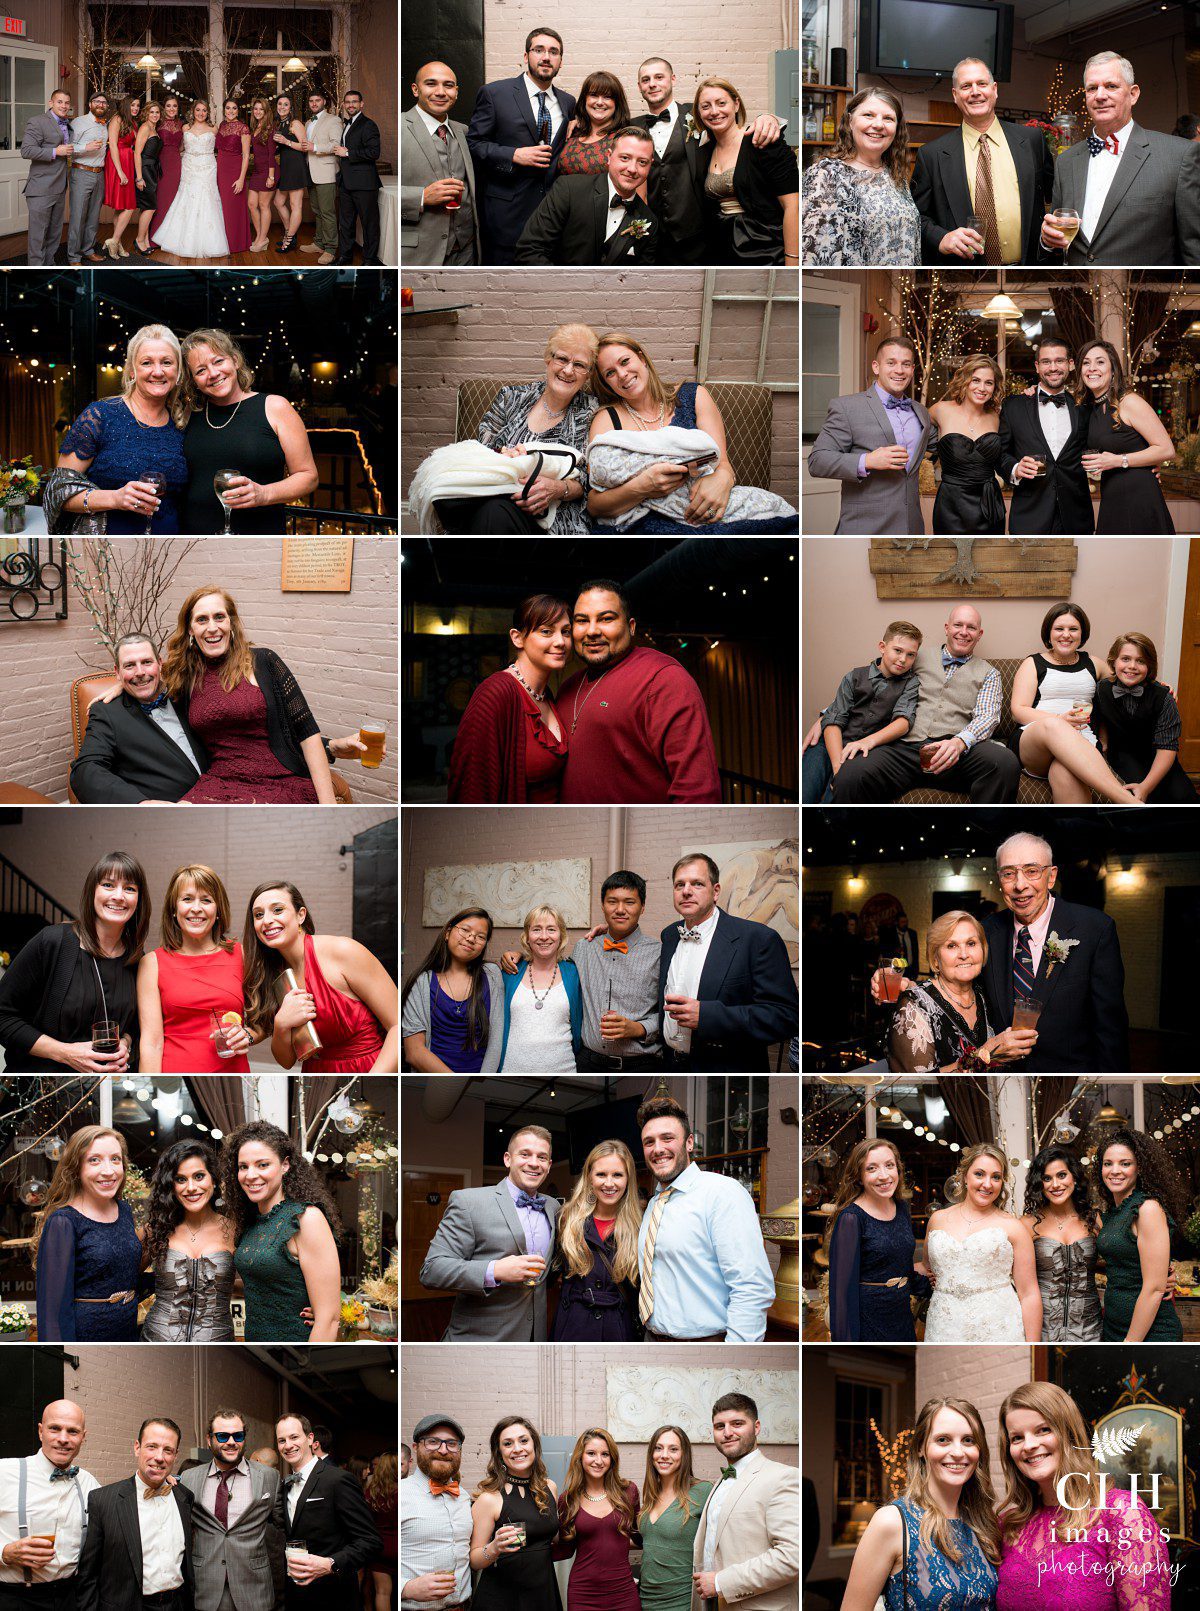 clh-images-photography-revolution-hall-wedding-revolution-hall-wedding-photography-troy-ny-wedding-brewery-wedding-erica-and-jeff-wedding-capital-district-wedding-photographer-136